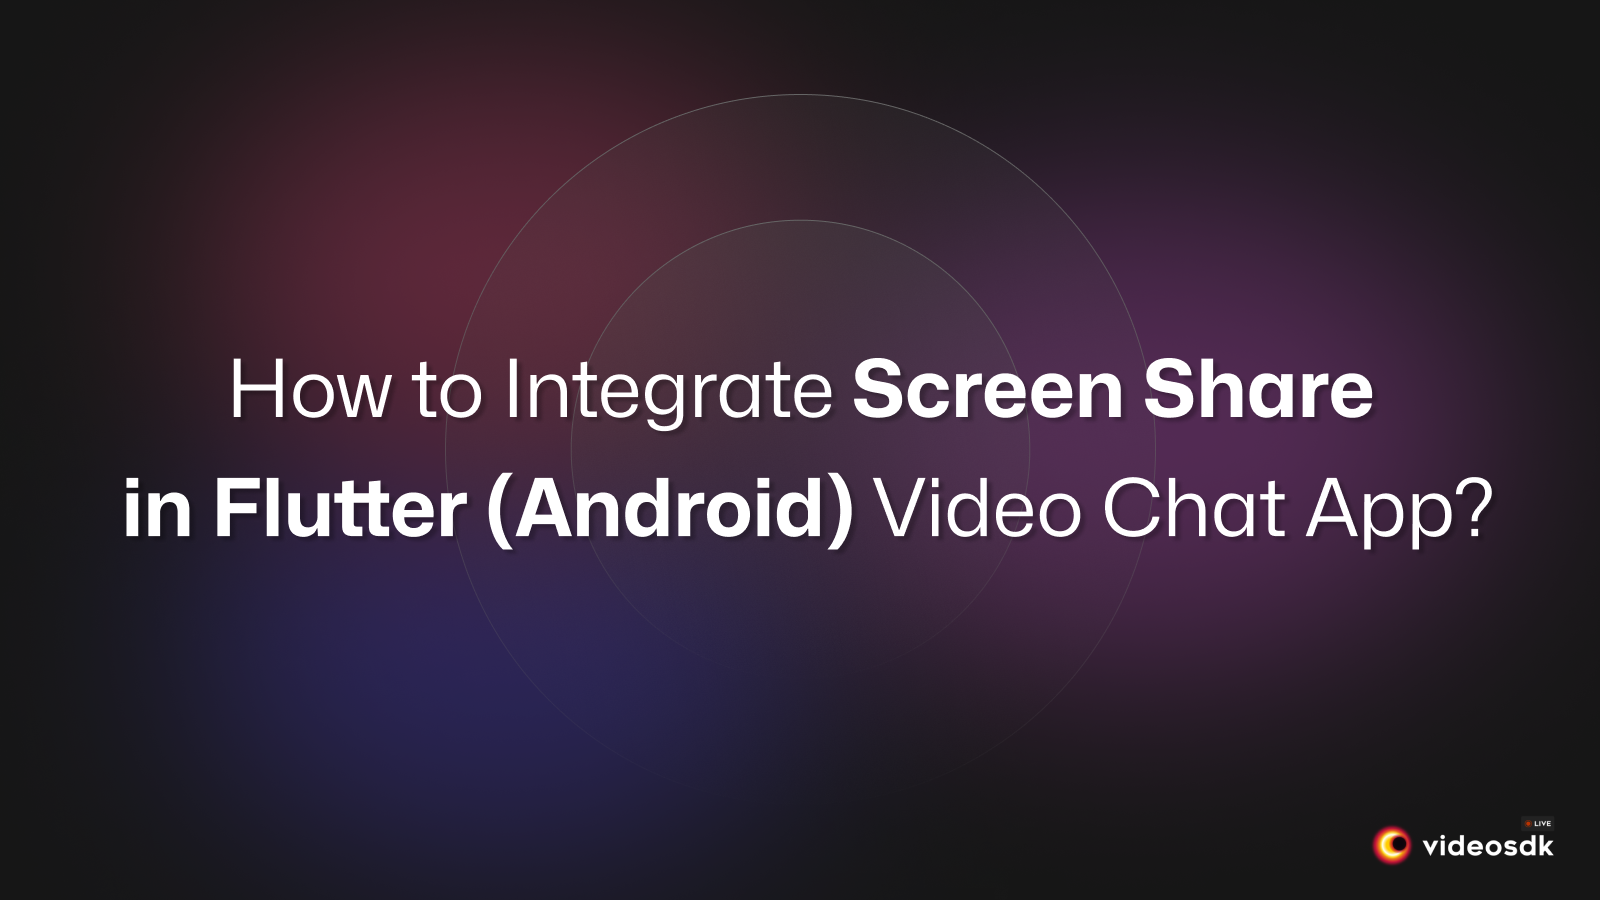 How to Implement Screen Share in Flutter Video Call App for Android?